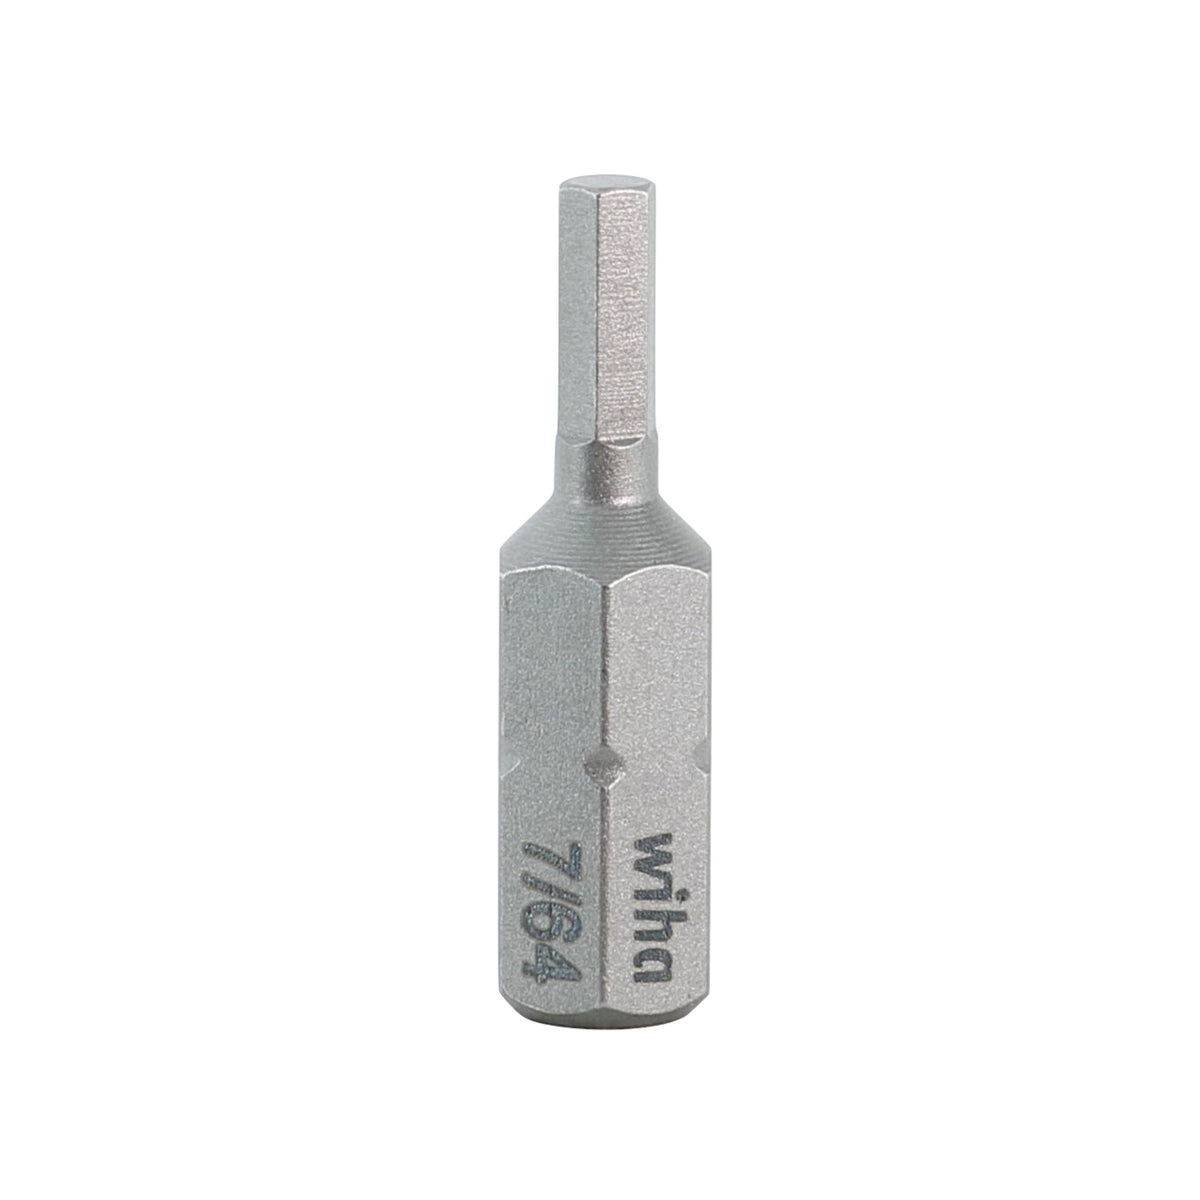 STAHLWILLE 3116 1/4 Manually operated hexagonal bit adapter 25mm